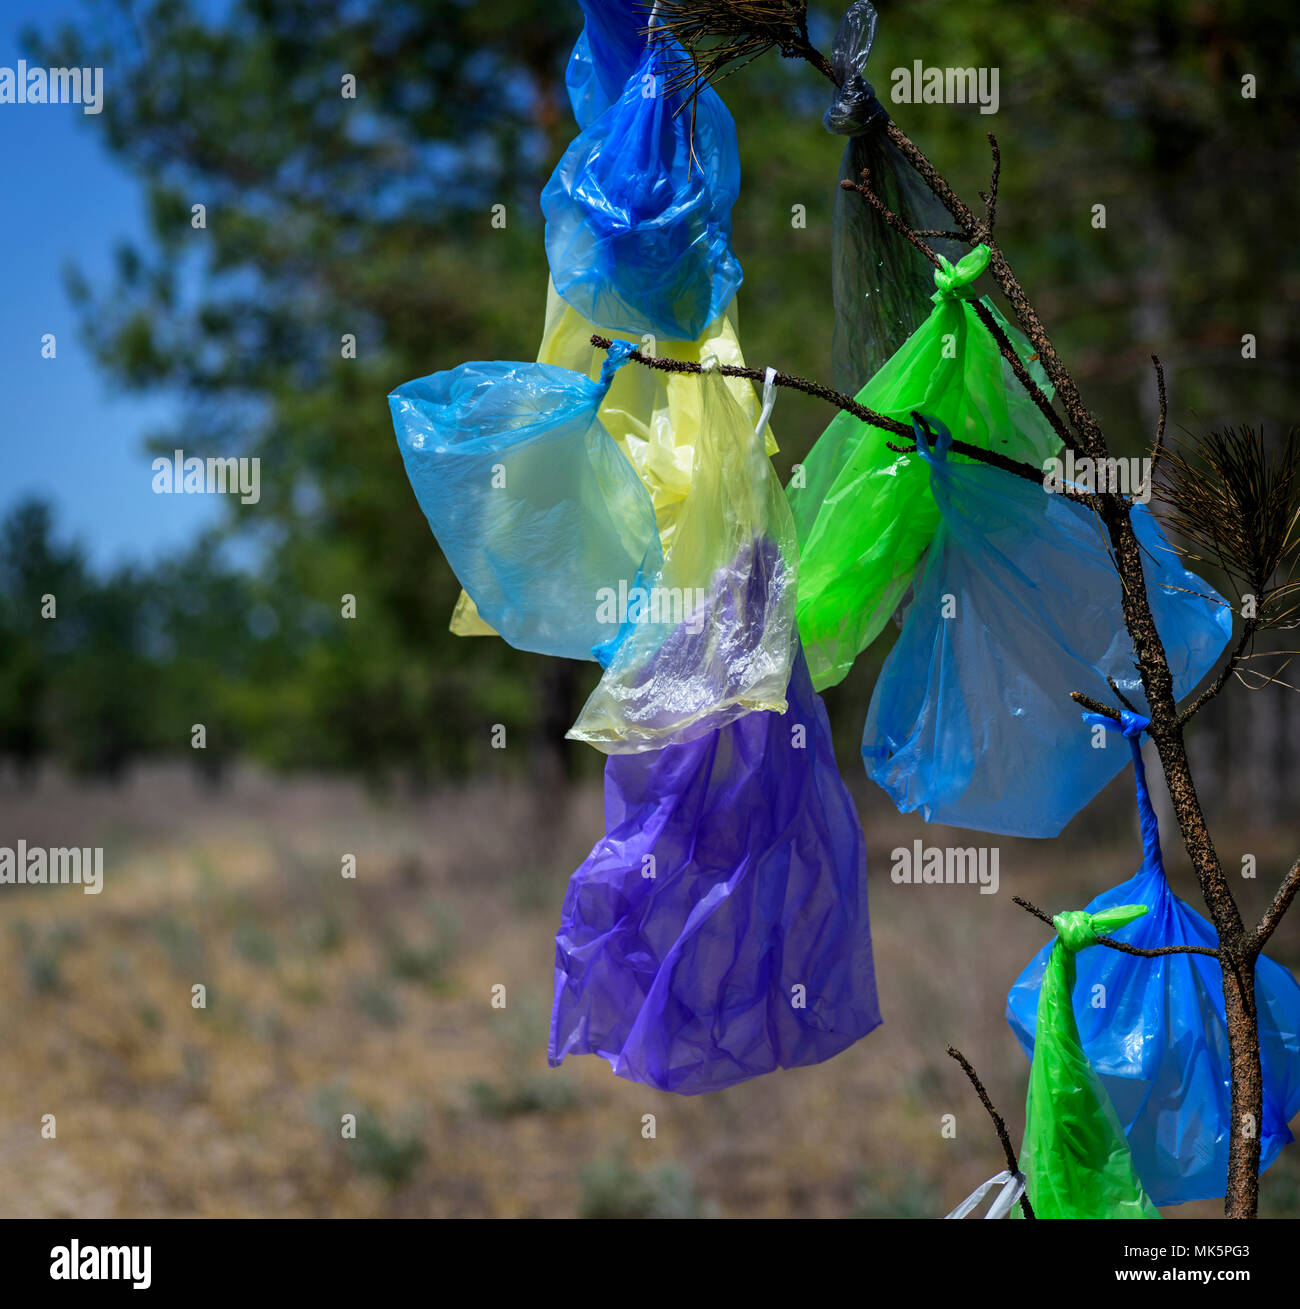 https://c8.alamy.com/comp/MK5PG3/many-multicolored-plastic-bags-hanging-on-a-pine-branch-against-a-background-of-green-forest-on-a-summer-day-the-concept-of-pollution-of-the-environm-MK5PG3.jpg